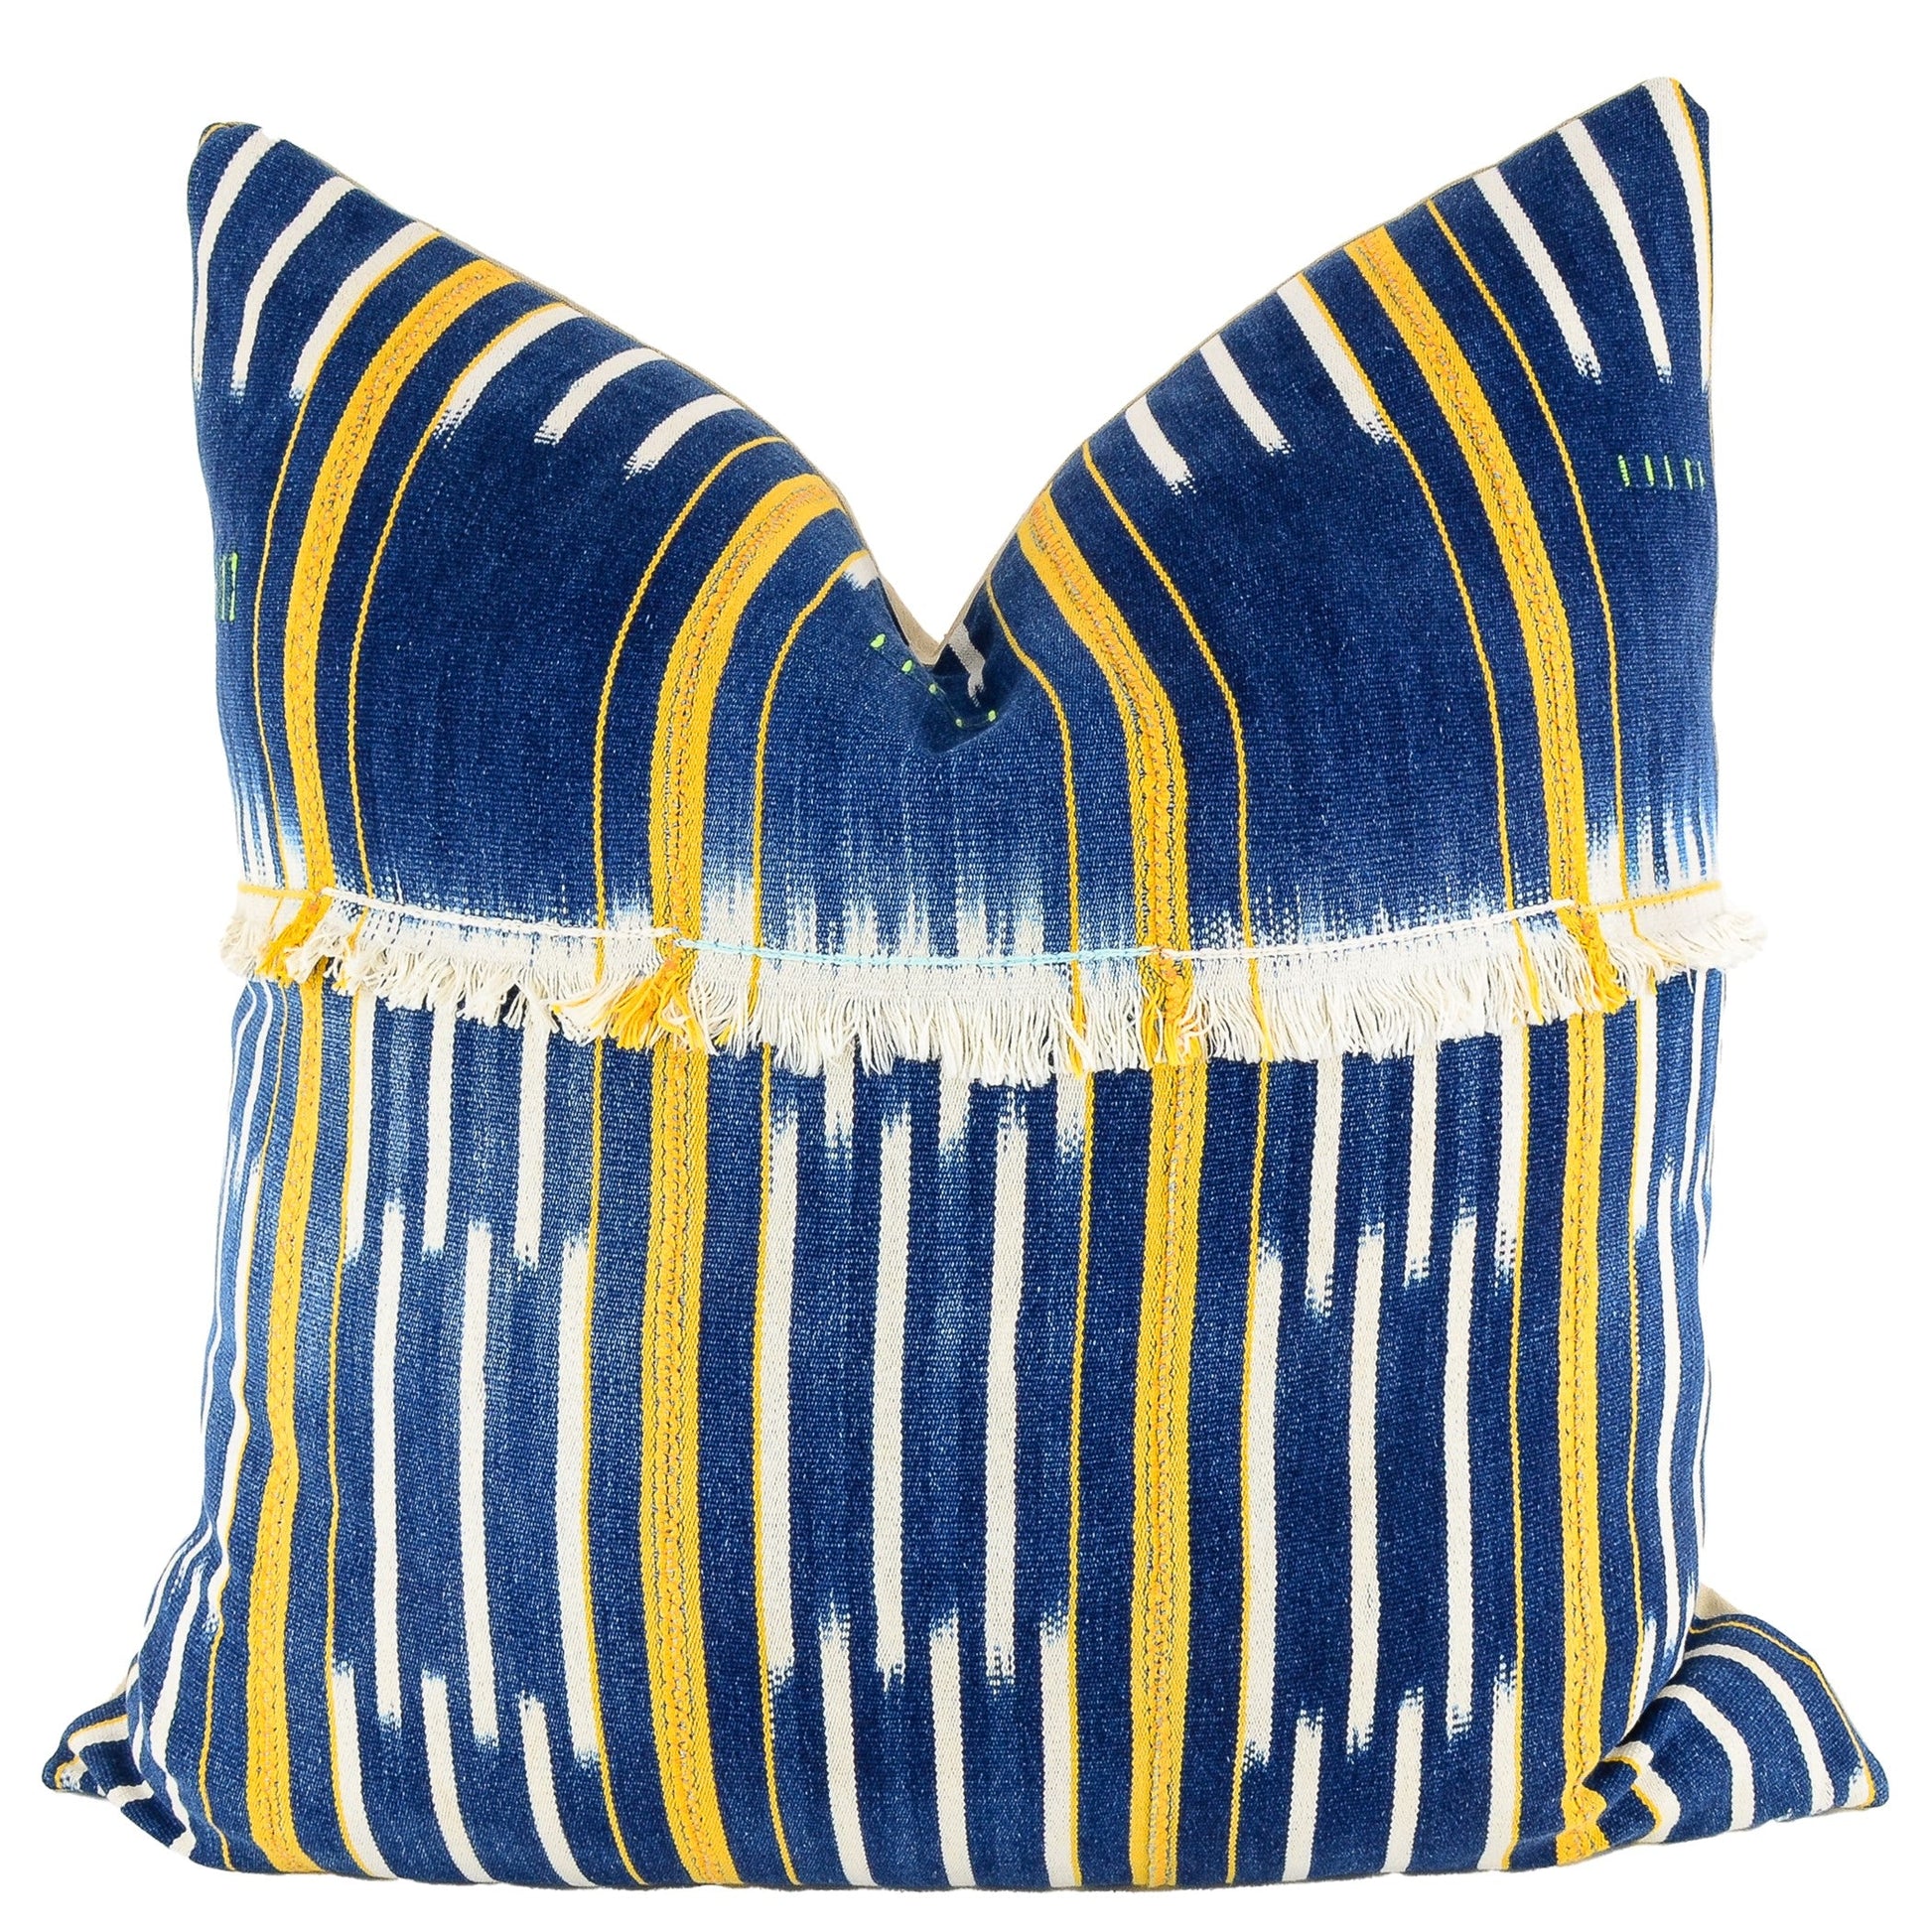 Front of pillow with rich blue and white patterns, yellow stripes and white fringe made from vintage handwoven Baoulé/Baule cotton cloth from Africa's Ivory Coast, reflecting the traditions, symbols, and tribal lives of the Baoulé/Baule people